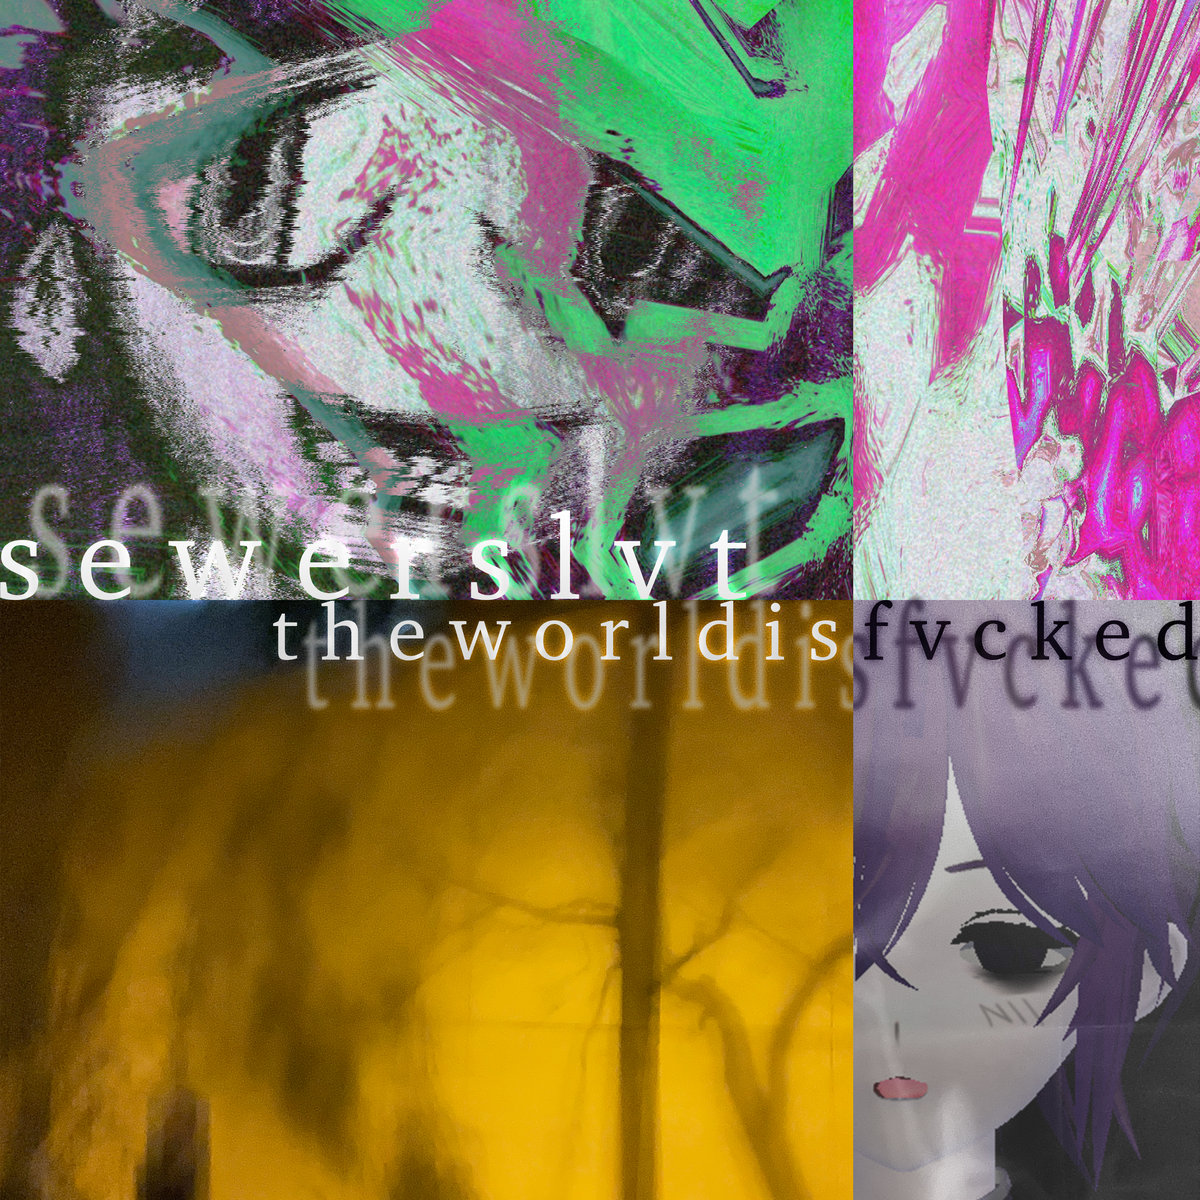 Sewerslvt The World Is Fvcked cover artwork